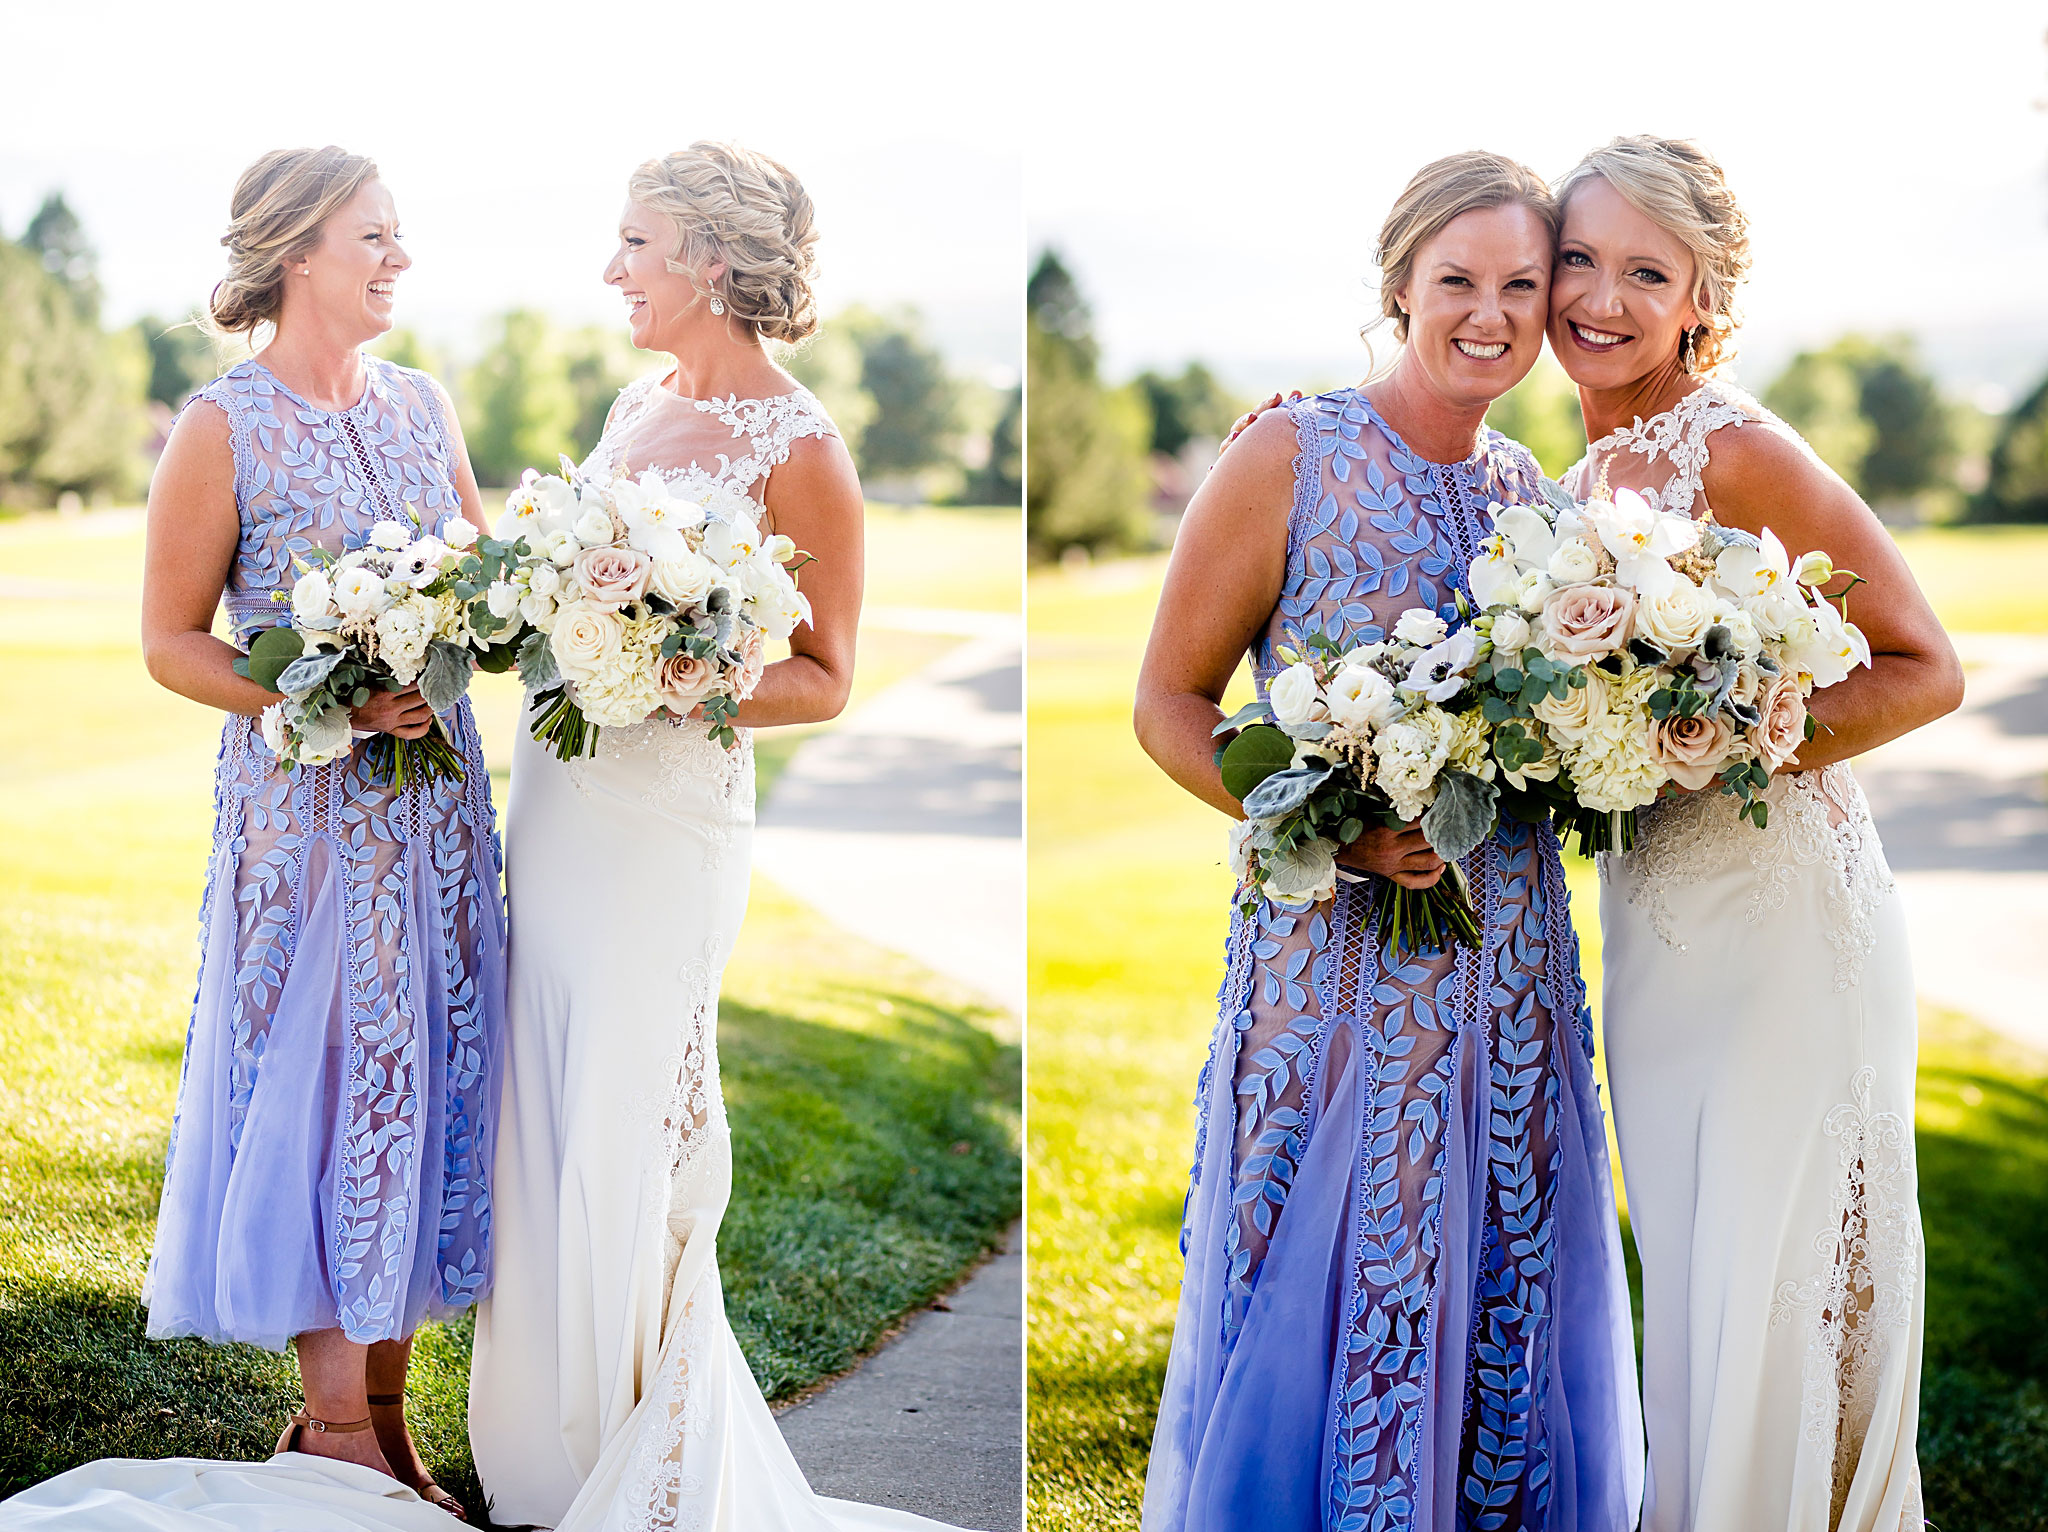 Bride and Maid of Honor Portrait. Kelli & Jason's golf course wedding at The Ranch Country Club by Colorado Wedding Photographer Jennifer Garza, Small wedding ideas, Intimate wedding, Golf Course Wedding, Country Club Wedding, Summer Wedding, Golf Wedding, Wedding planning, Colorado Wedding Photographer, Colorado Elopement Photographer, Colorado Elopement, Colorado Wedding, Denver Wedding Photographer, Denver Wedding, Wedding Inspiration, Summer Wedding Inspiration, Covid Wedding